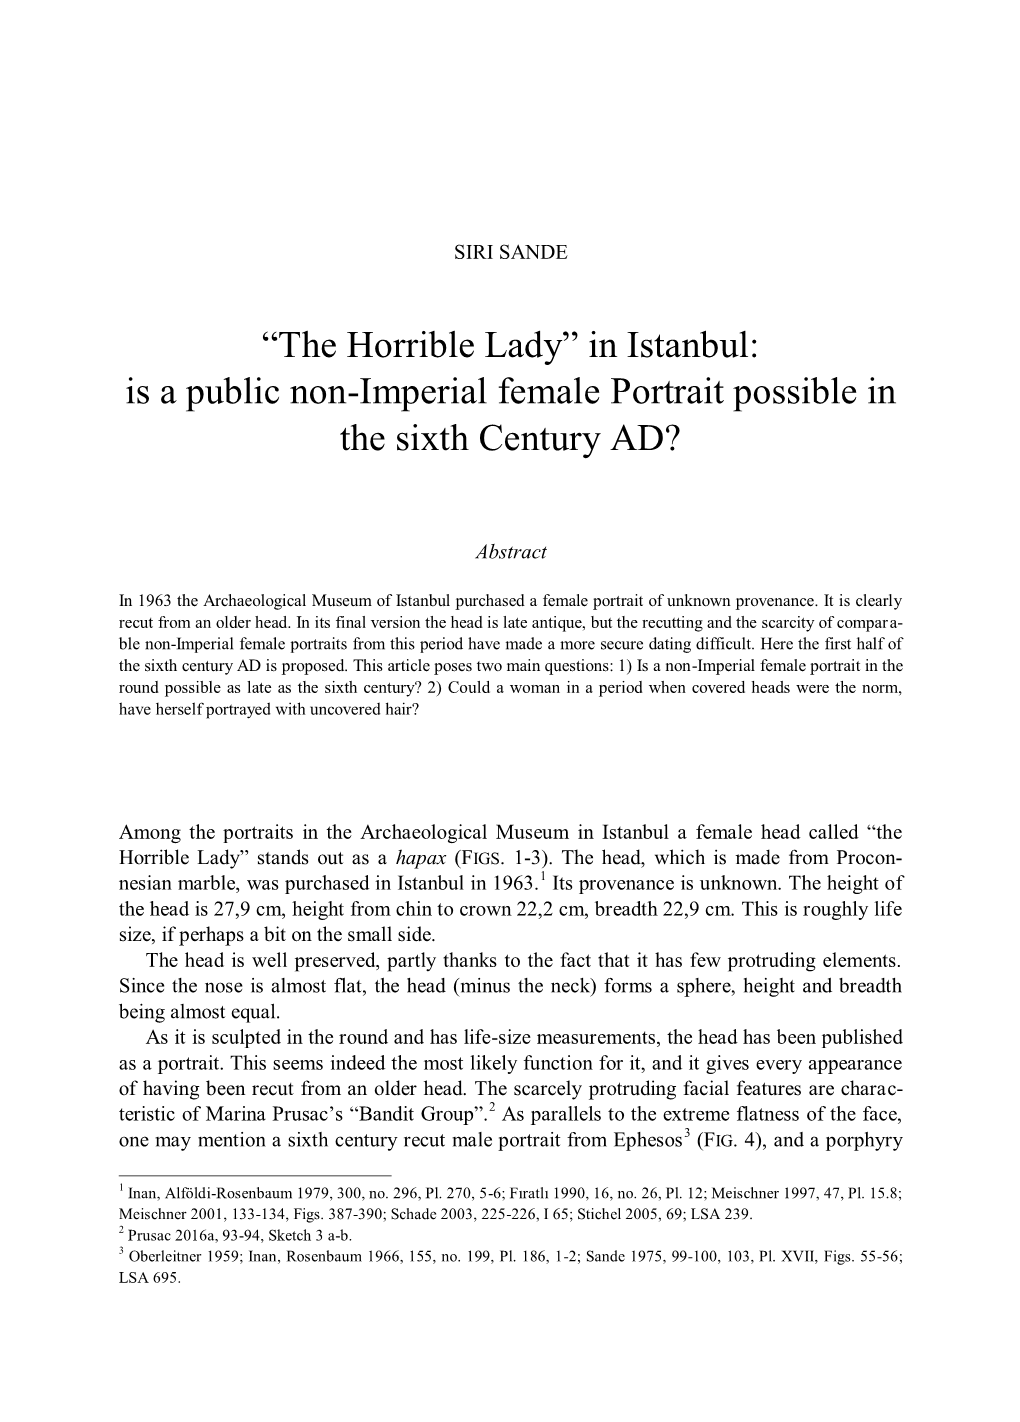 “The Horrible Lady” in Istanbul: Is a Public Non-Imperial Female Portrait Possible in the Sixth Century AD?